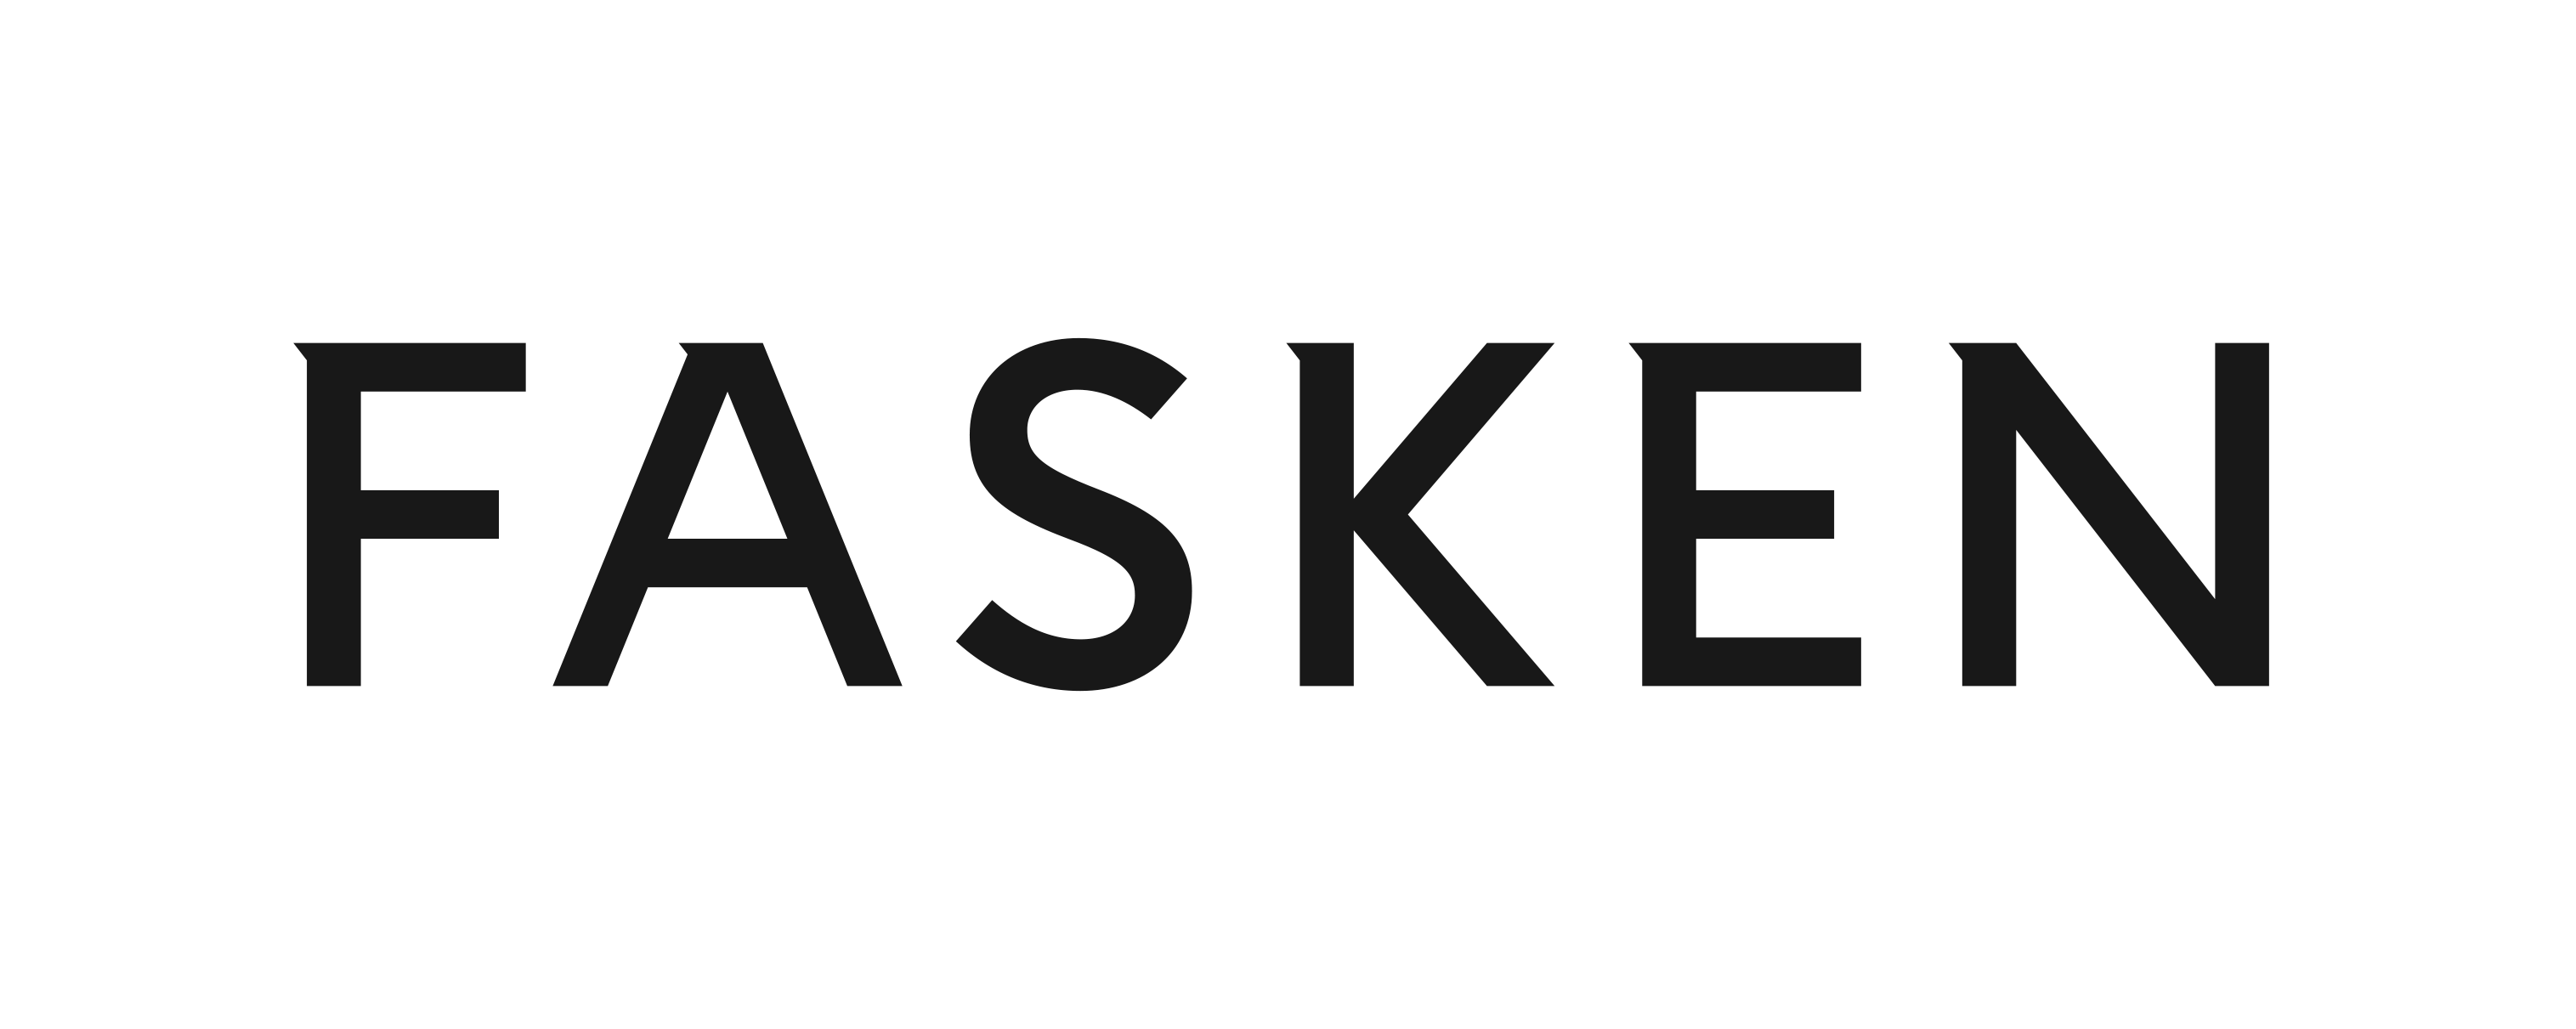 Fasken Martineau Mining and M&A Groups Welcome a New Partner in Toronto